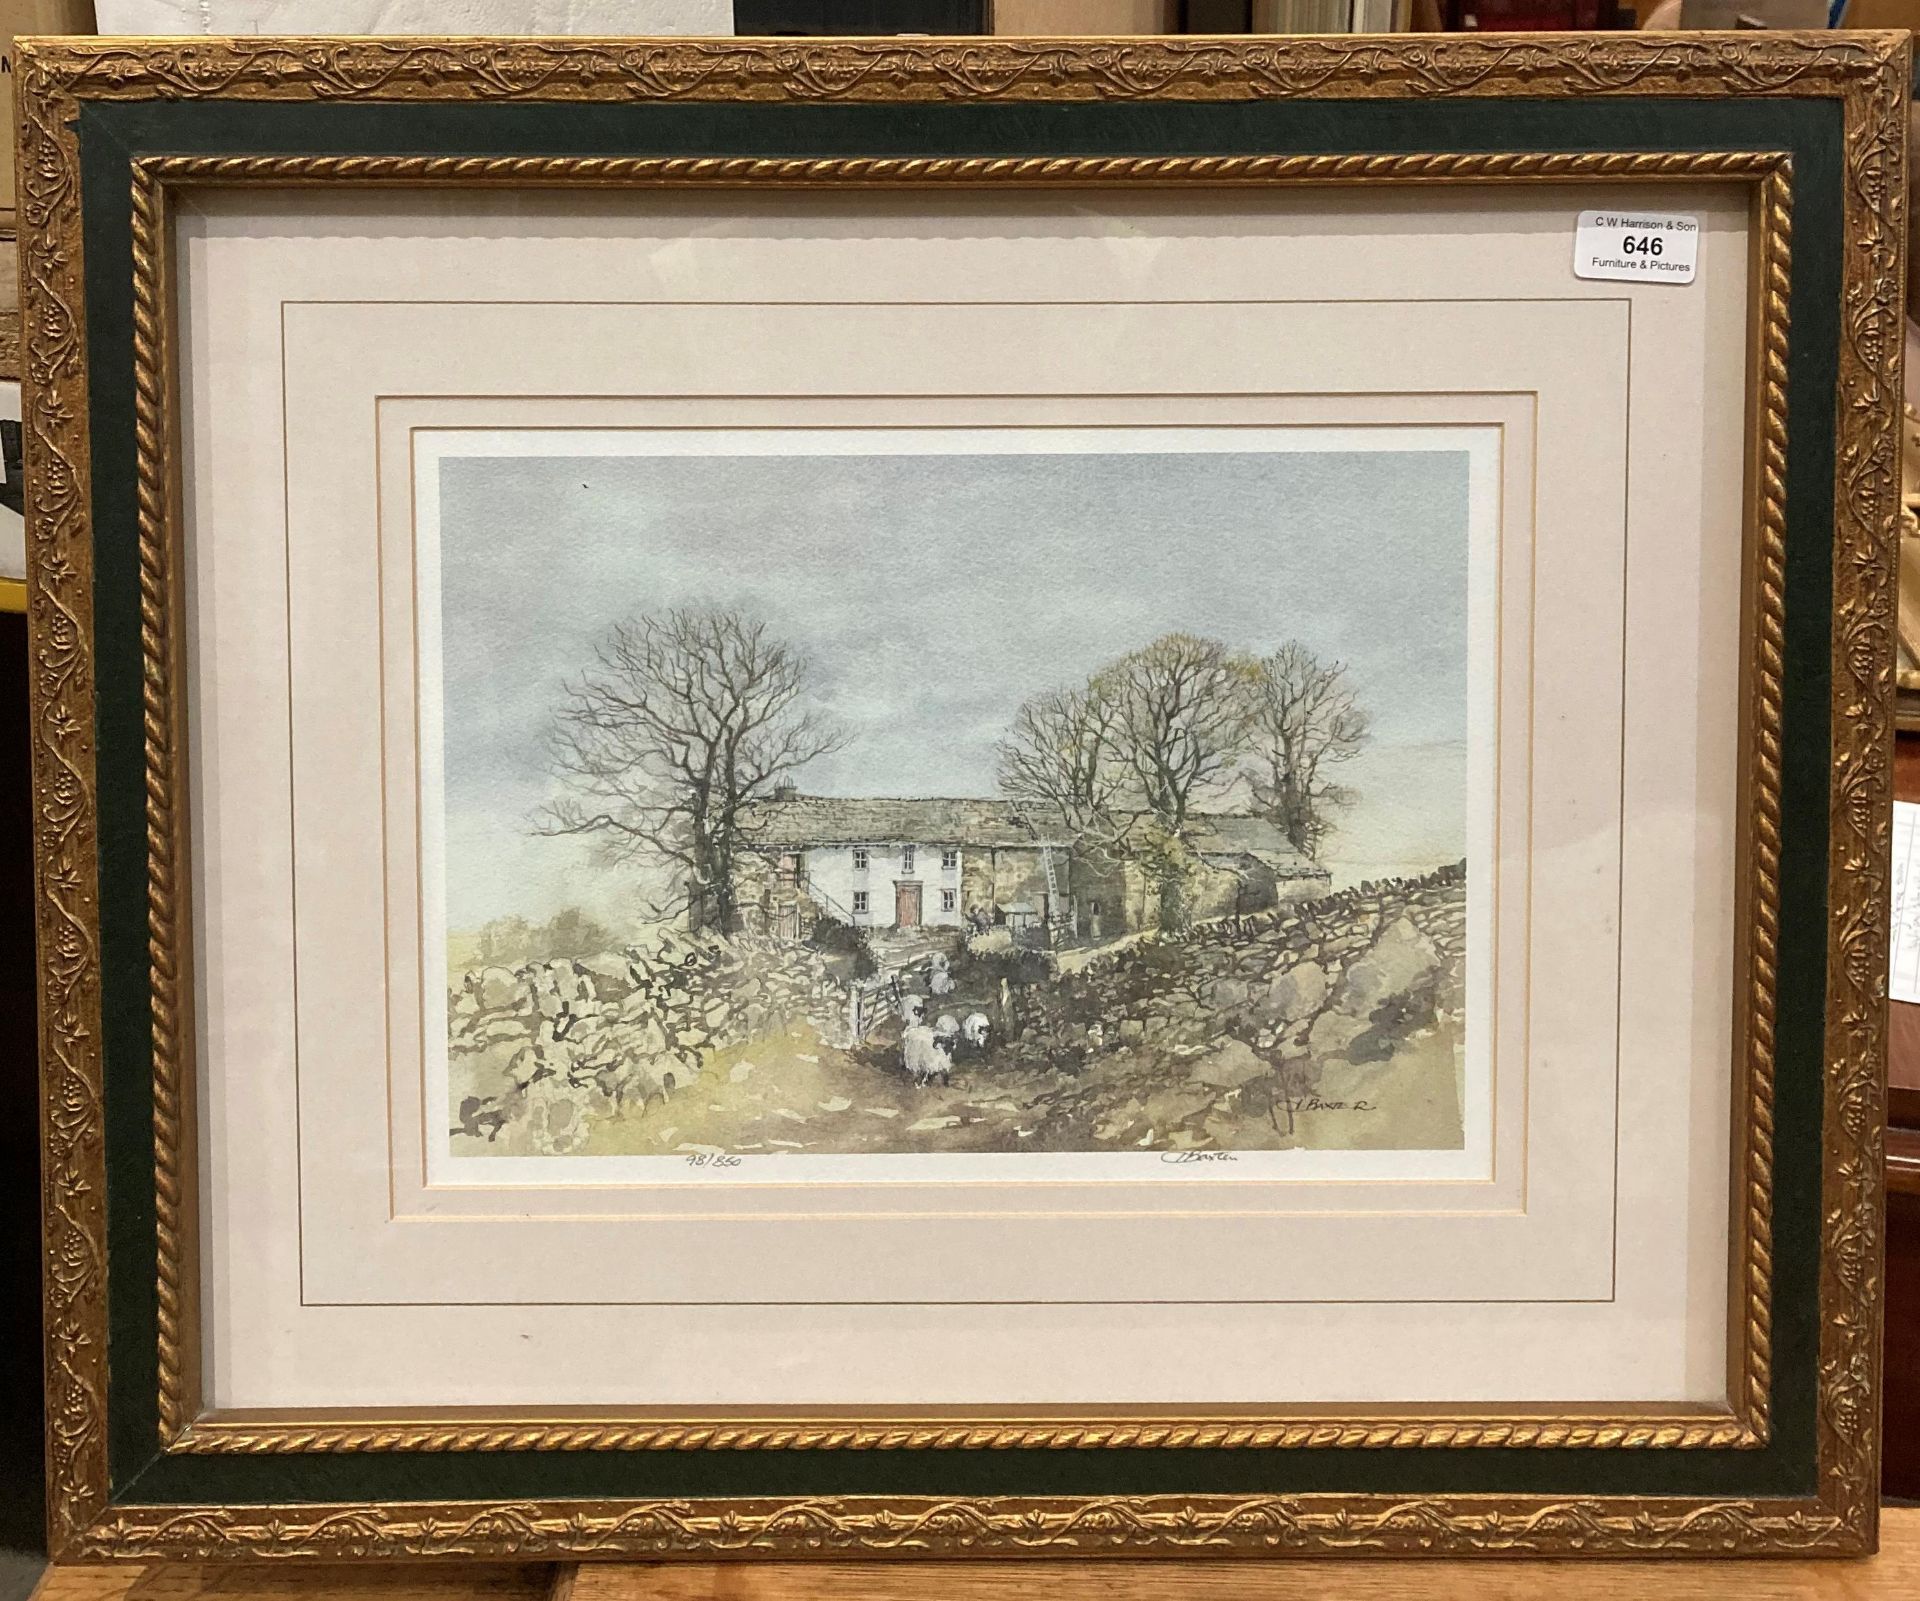 J Baxter framed Limited Edition print 'Brough, N Yorks' 30cm x 36cm signed in pencil and no 98/850.